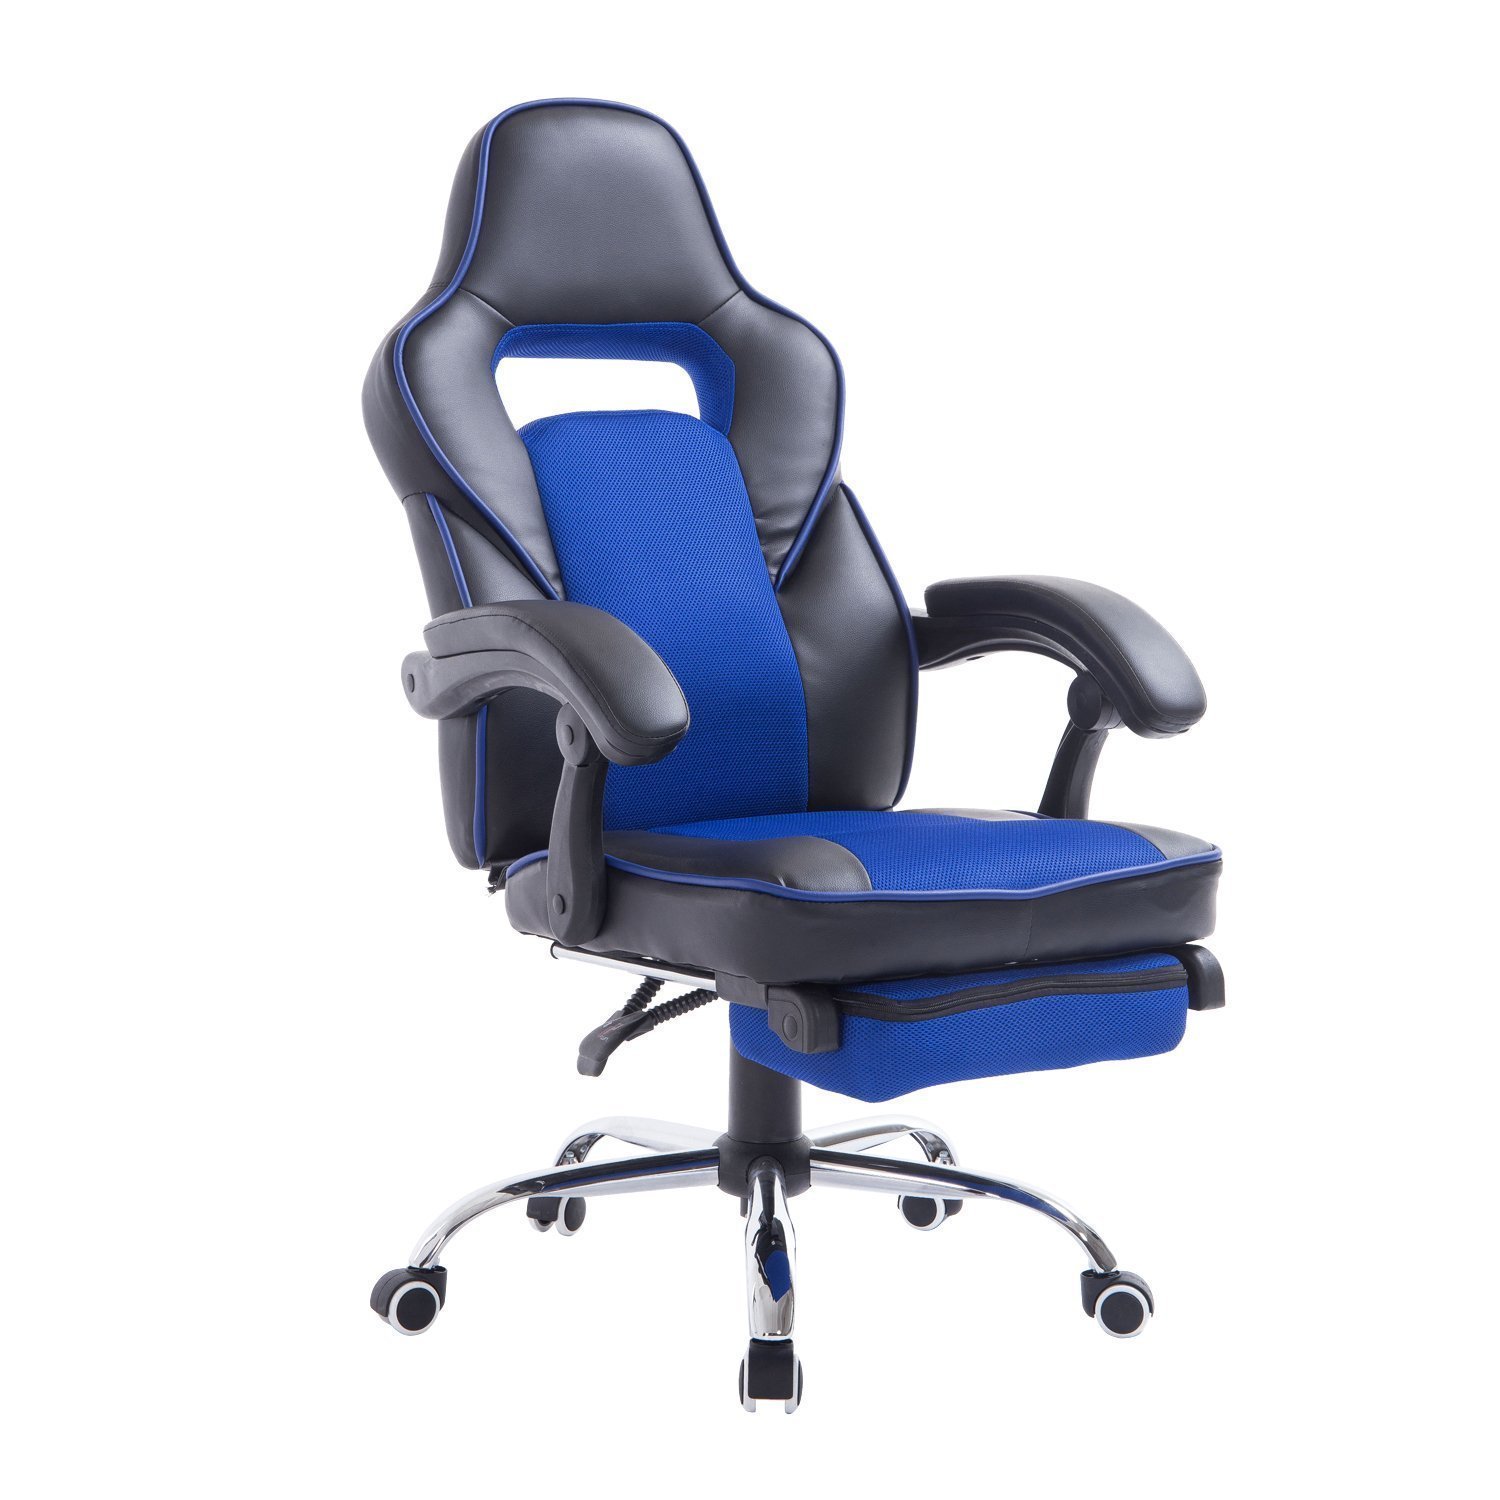 Top 10 Reclining Office Chairs Reviewed | Updated Guide For 2018